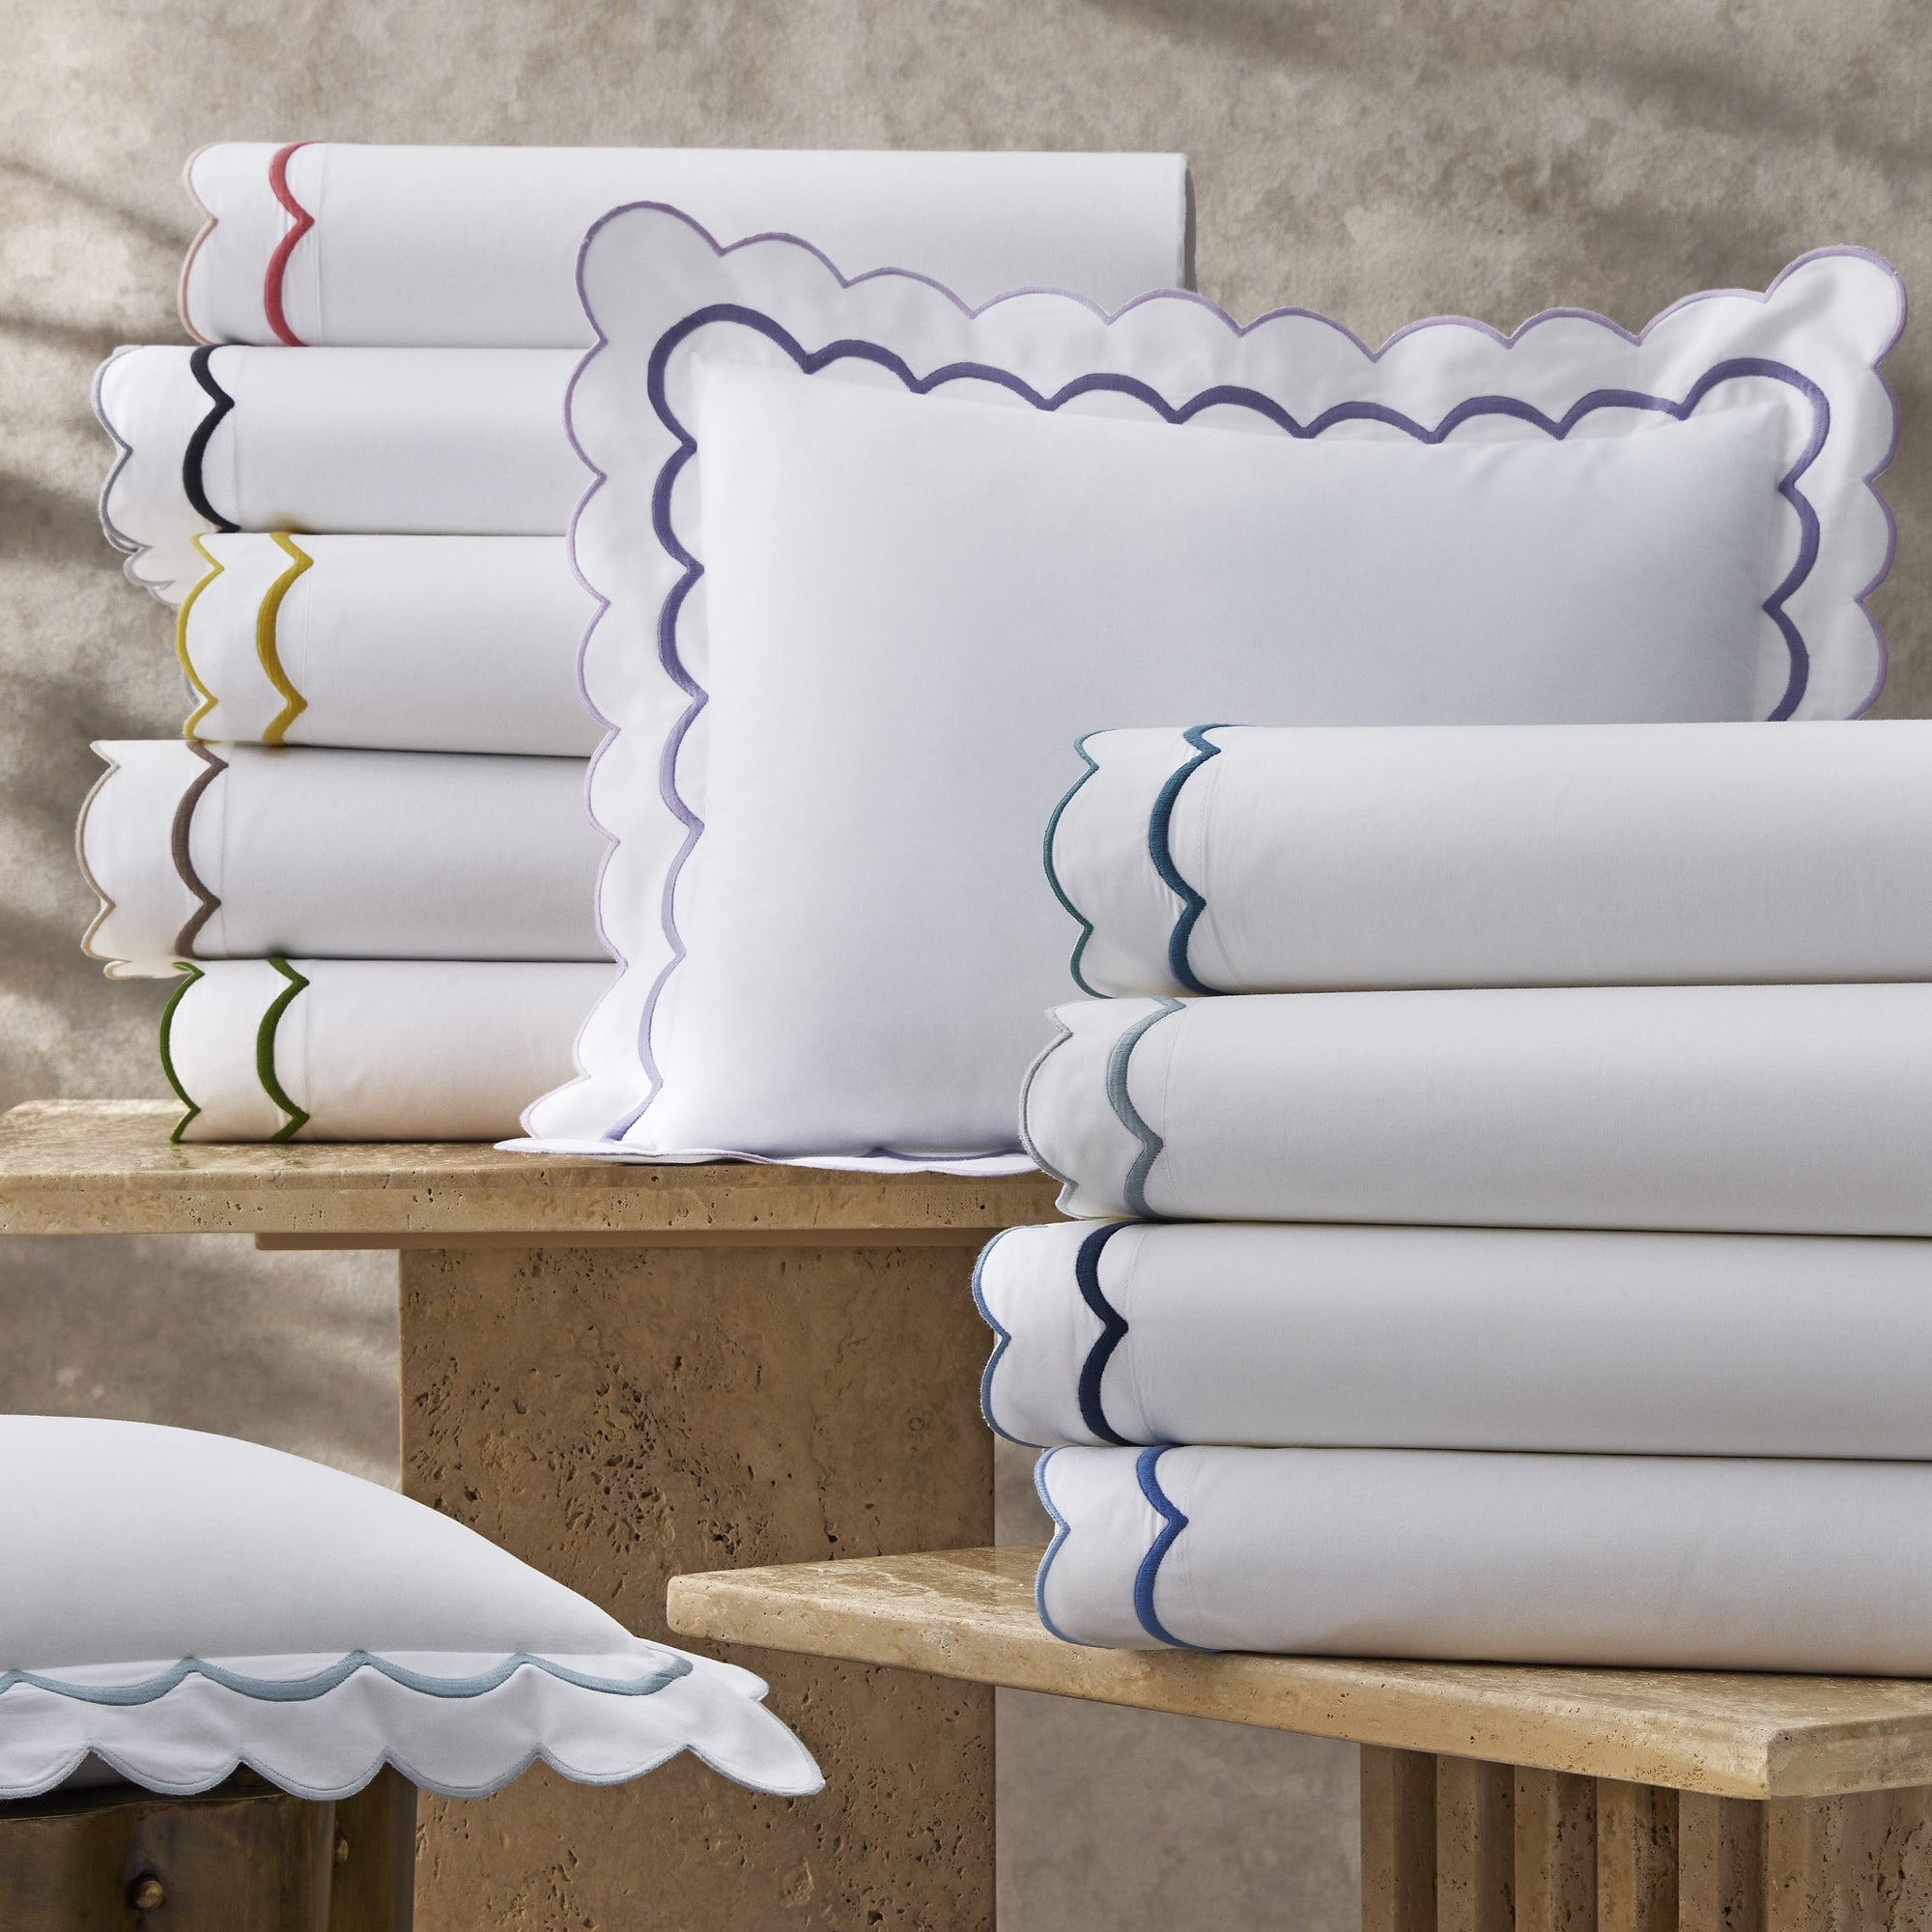 Stack of Matouk India Bedding in Different Colors